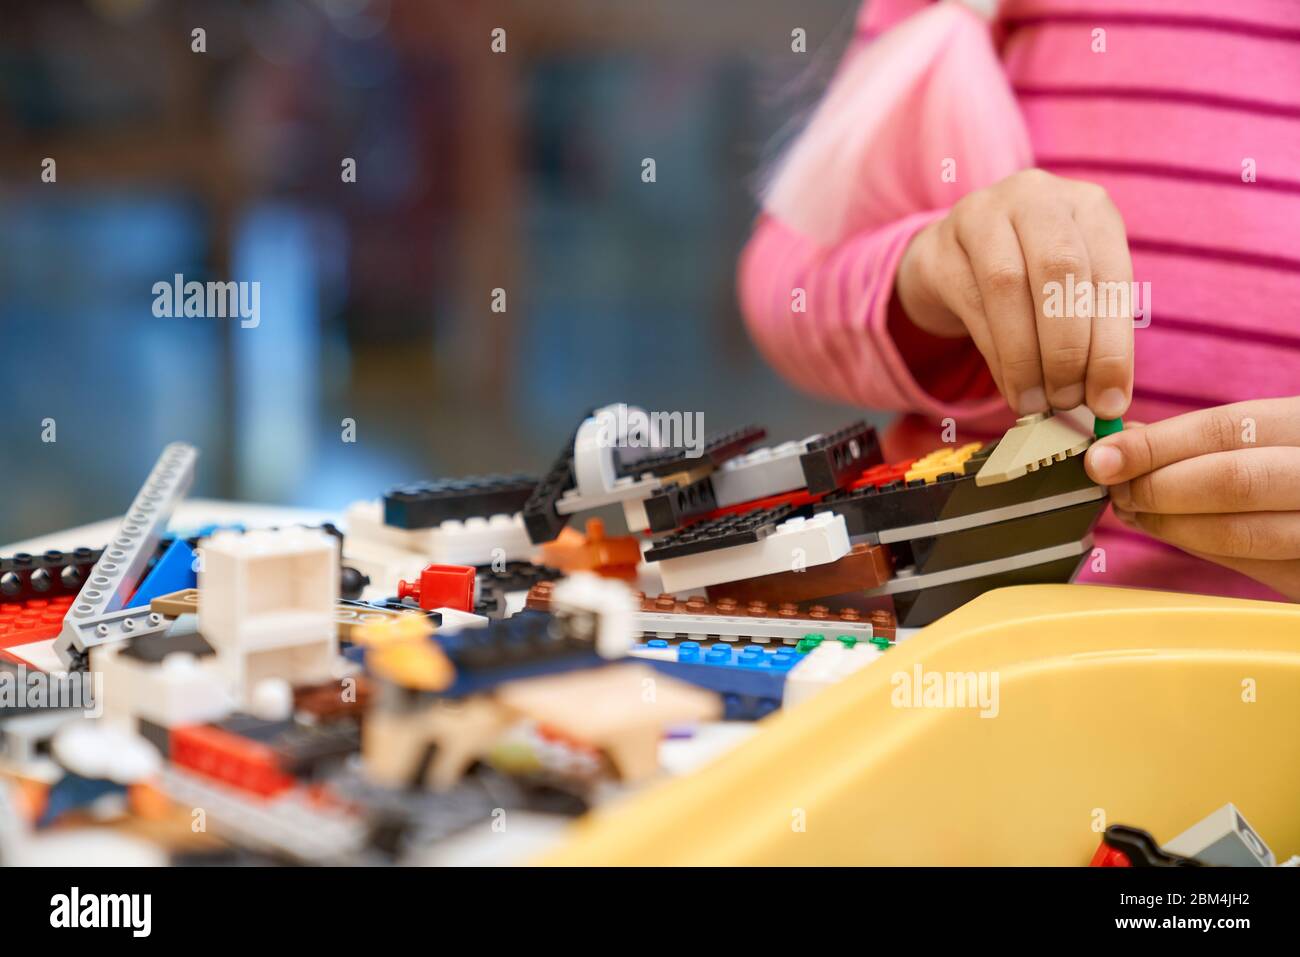 Front view of building kit for kids creating toys, having positive emotions and joy. Crop of incognito african girl working on project, hands taking colorful parts. Concept of science engineering. Stock Photo